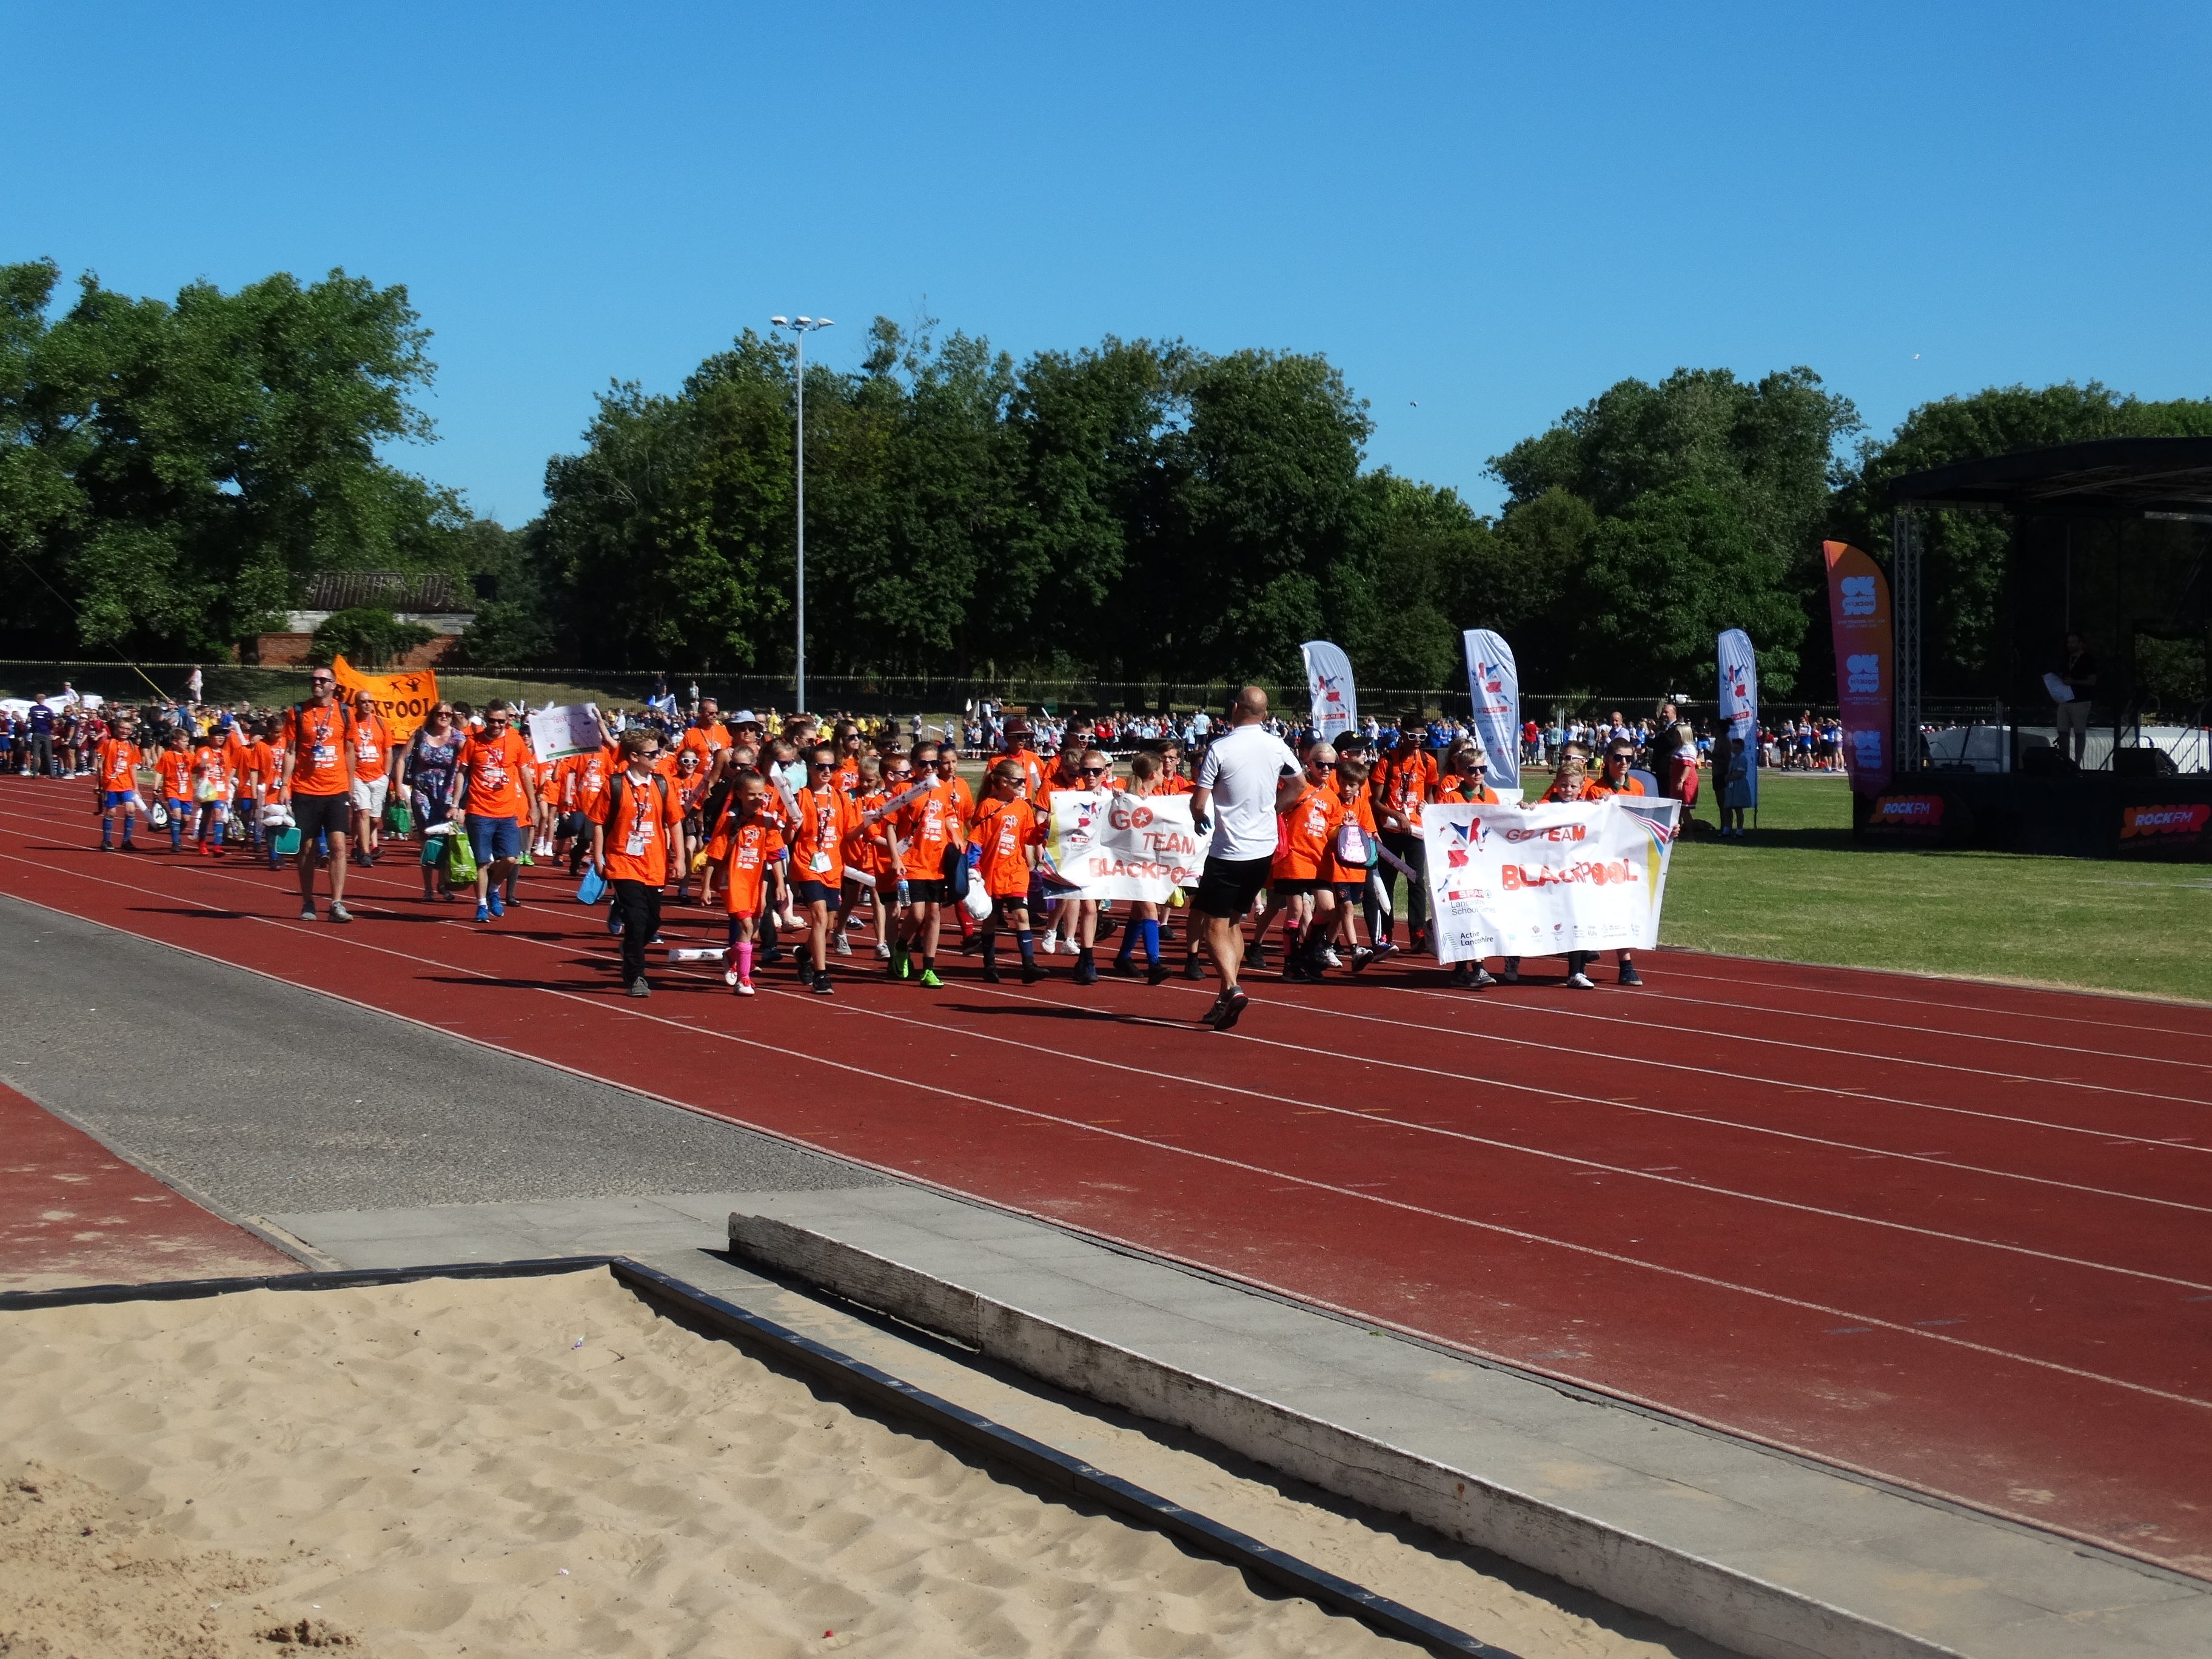 Group parade round the track at Blackpool Sports Centre